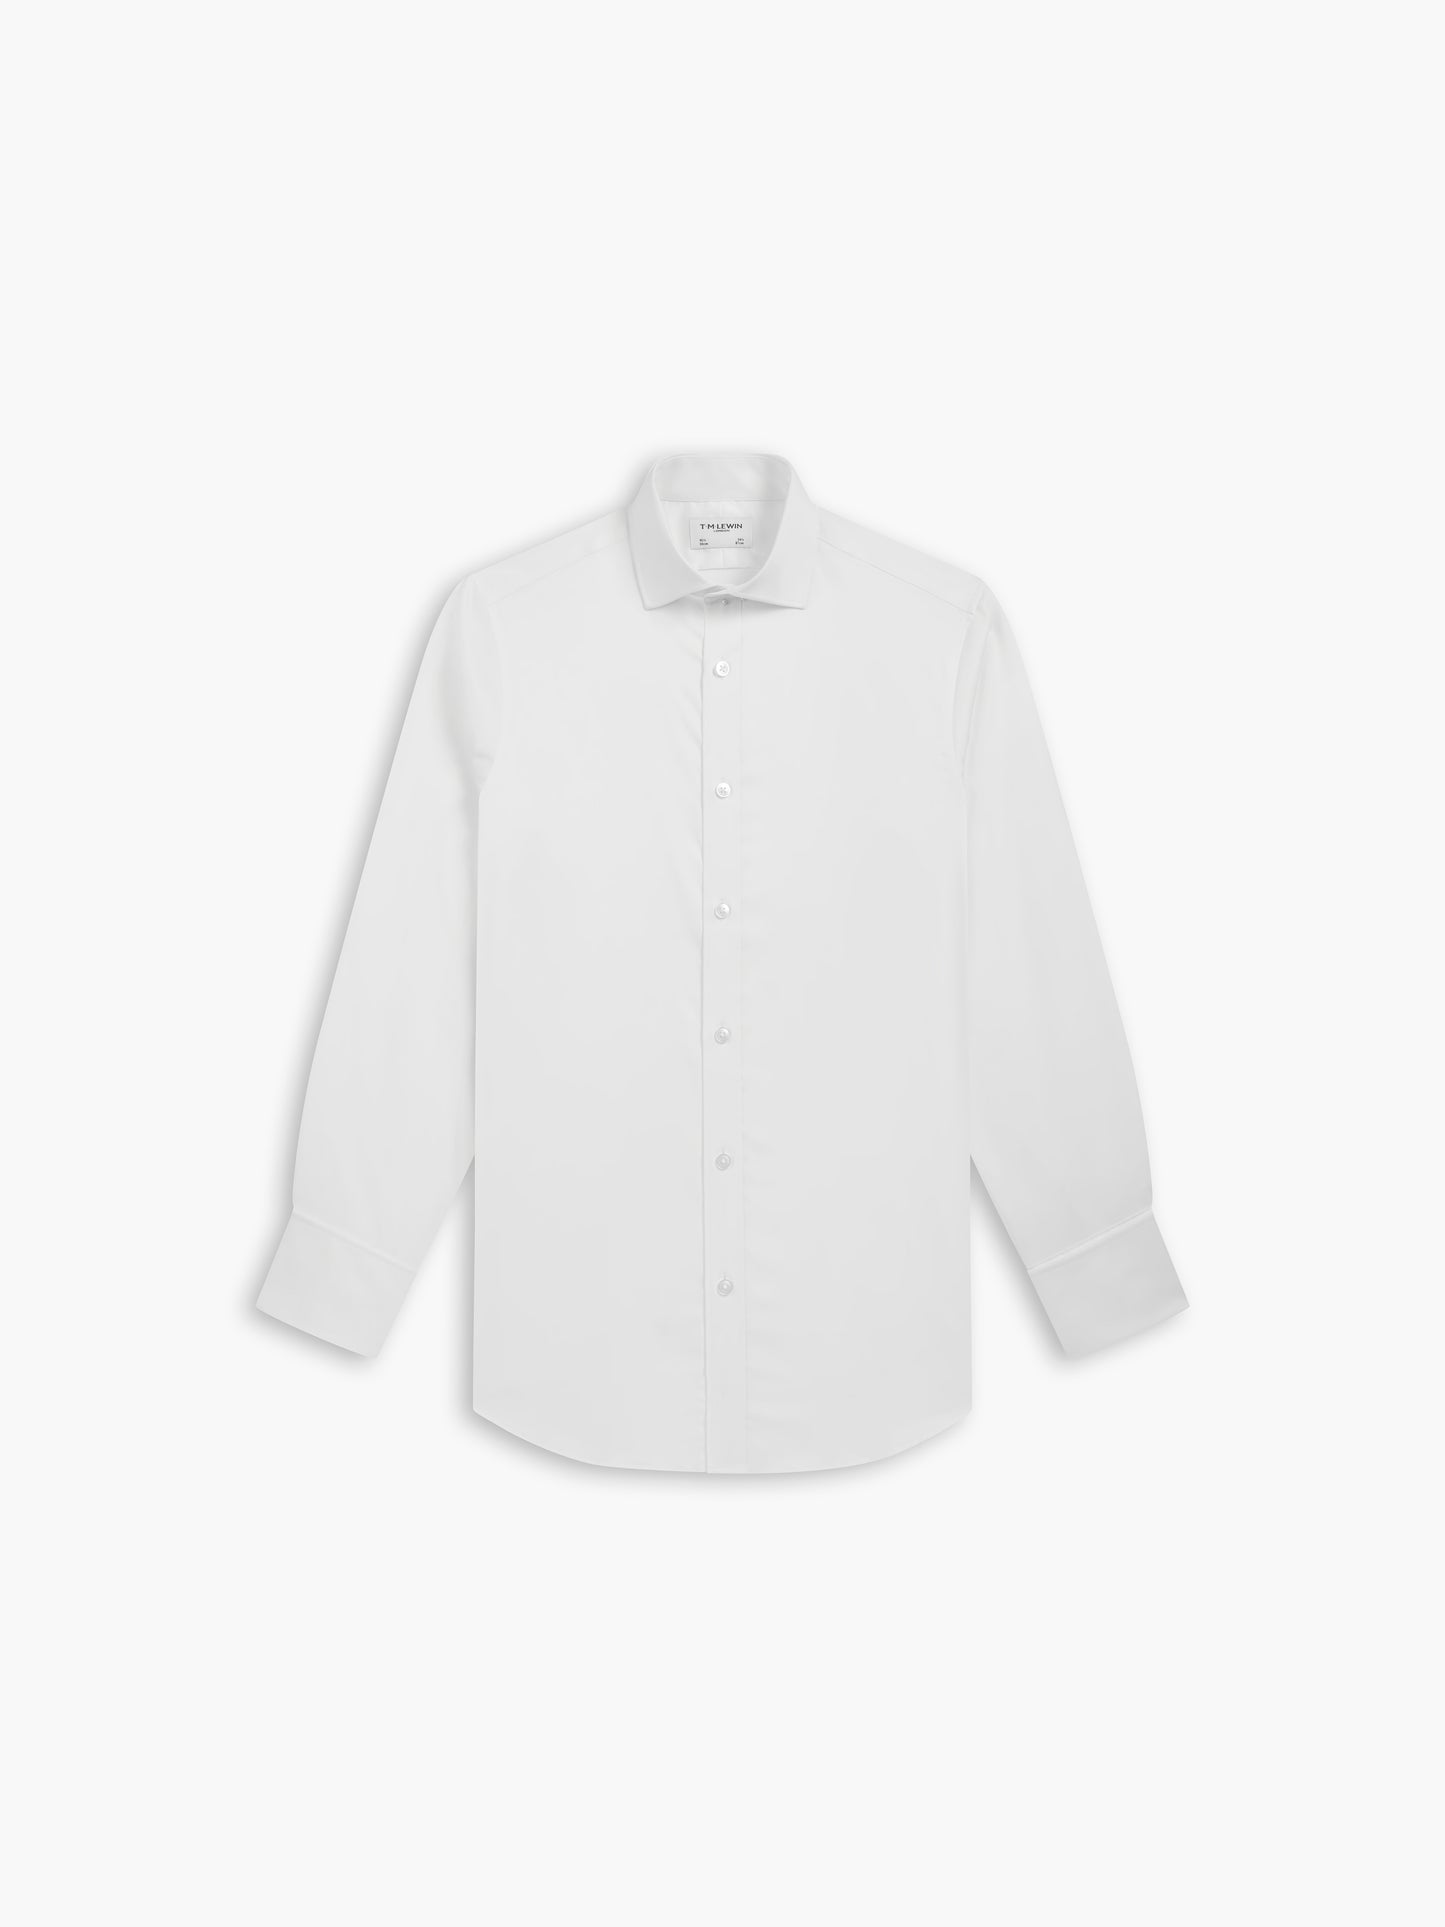 White Fine Twill Fitted Double Cuff Cutaway Collar Shirt